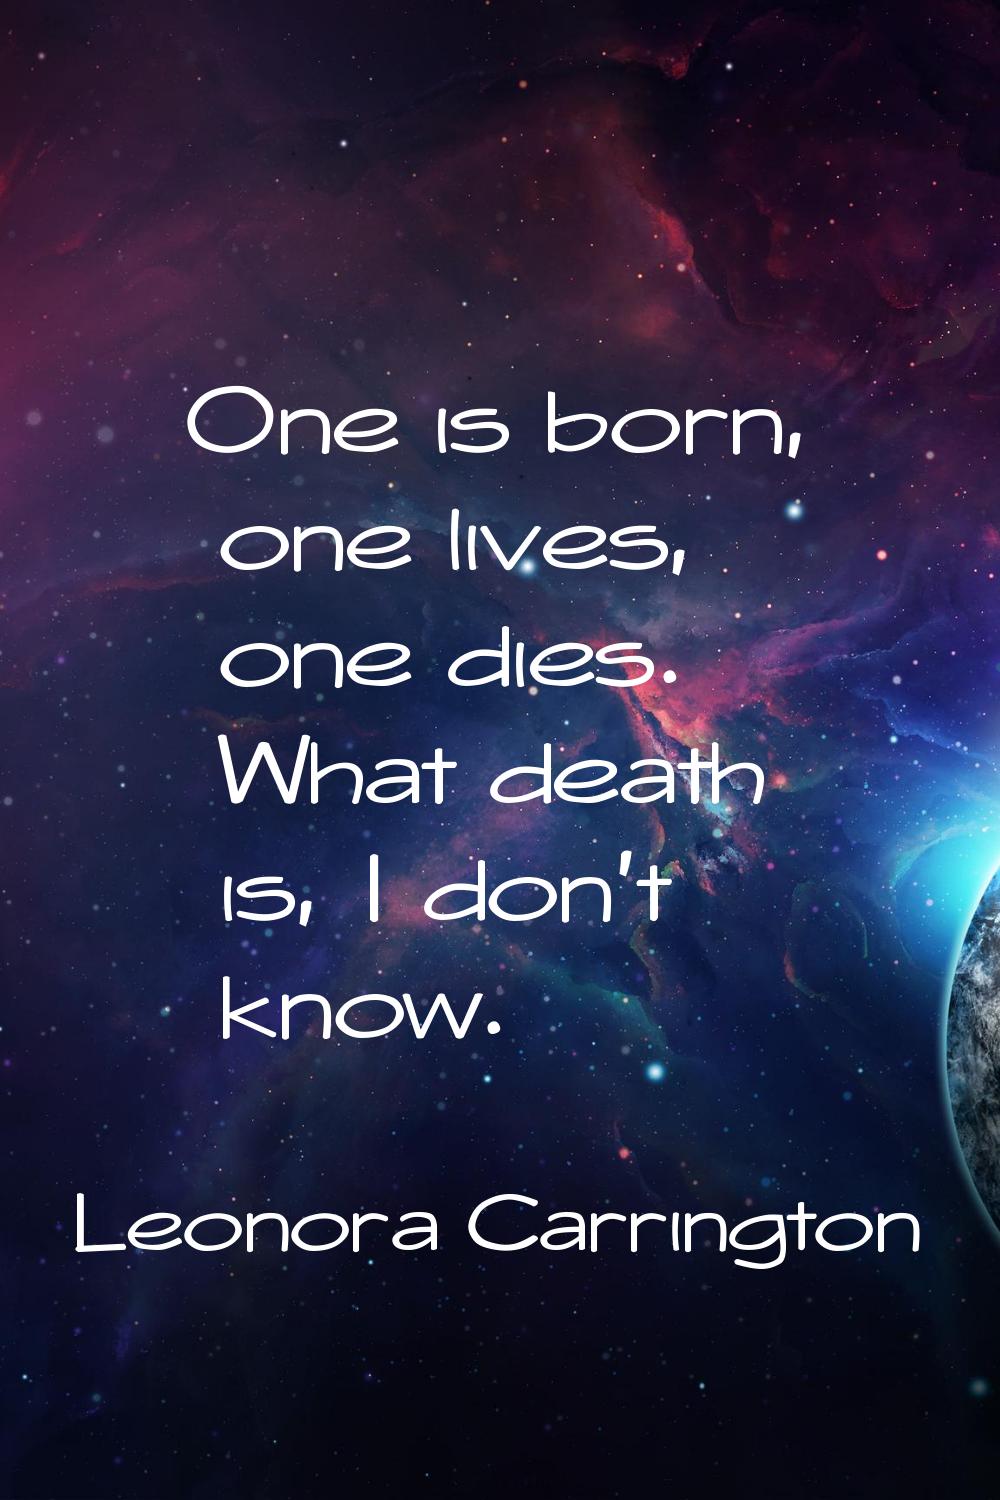 One is born, one lives, one dies. What death is, I don't know.